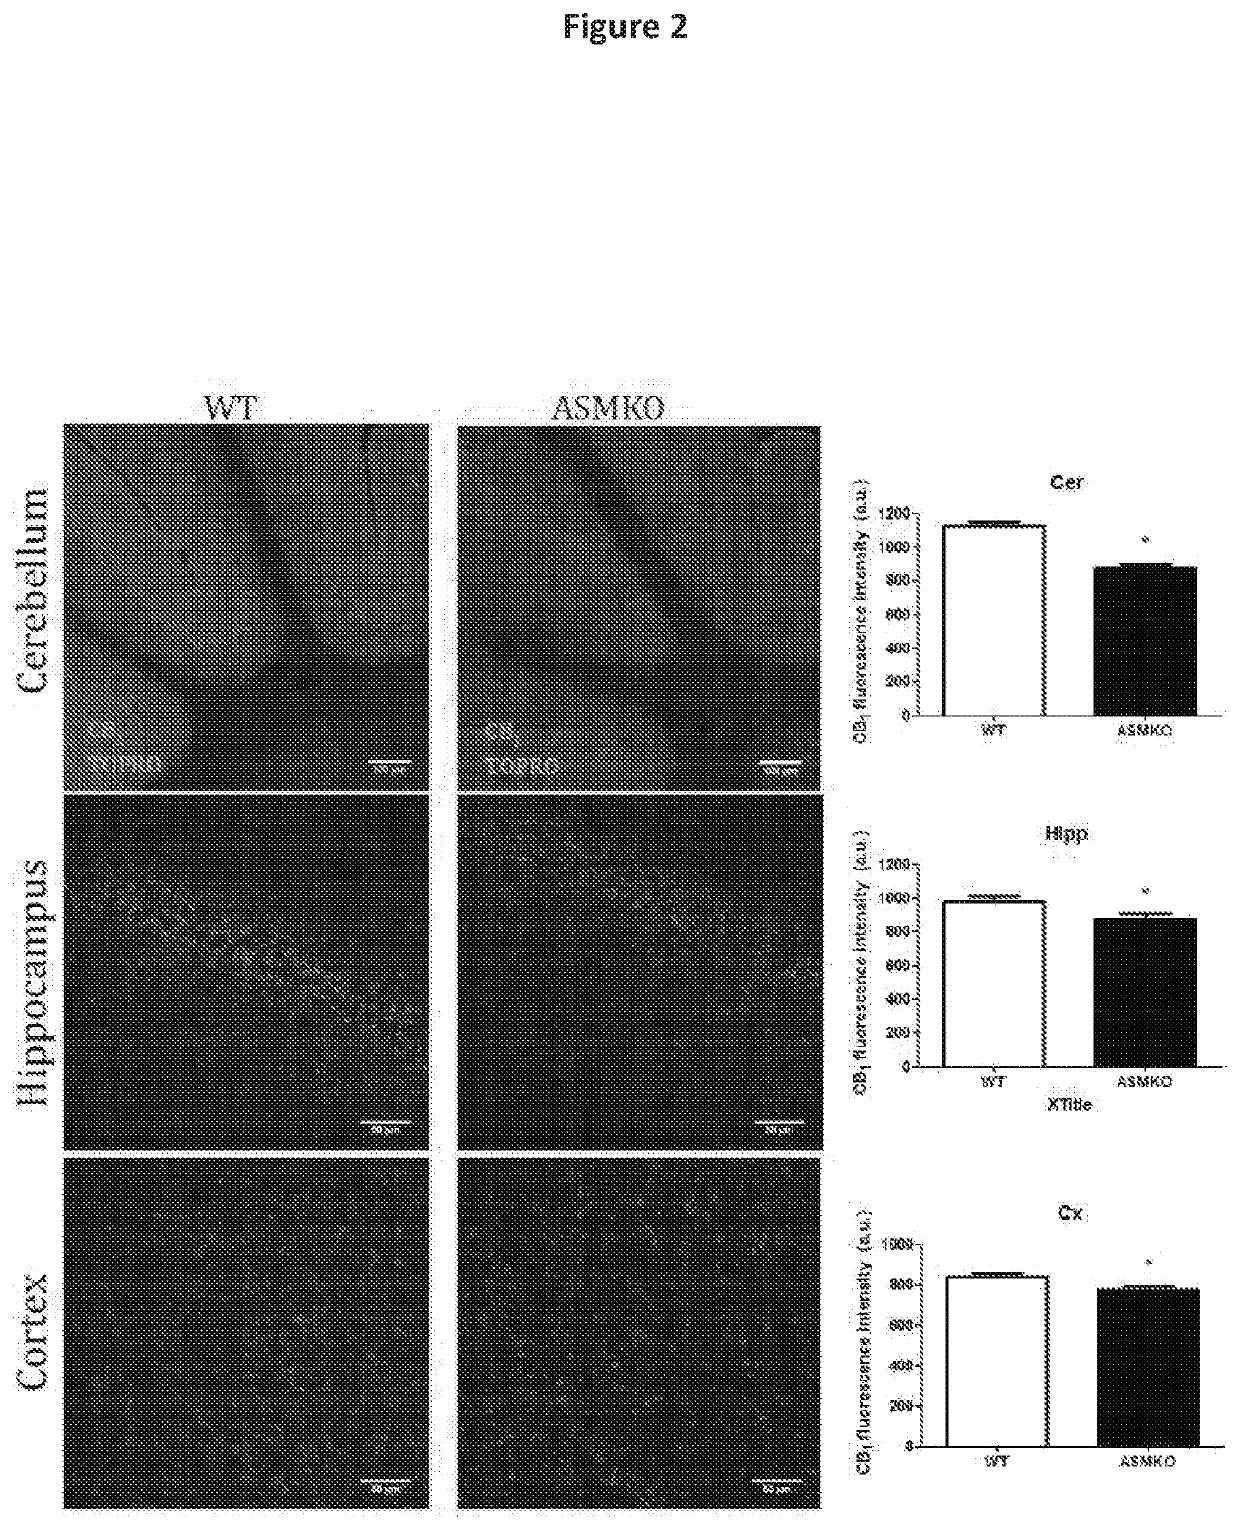 Compositions and methods for activating signaling through the cb1 cannabinoid receptor for treating and preventing diseases and disorders characterized by abnormal cellular accumulation of sphingolipids such as sphingomyelin